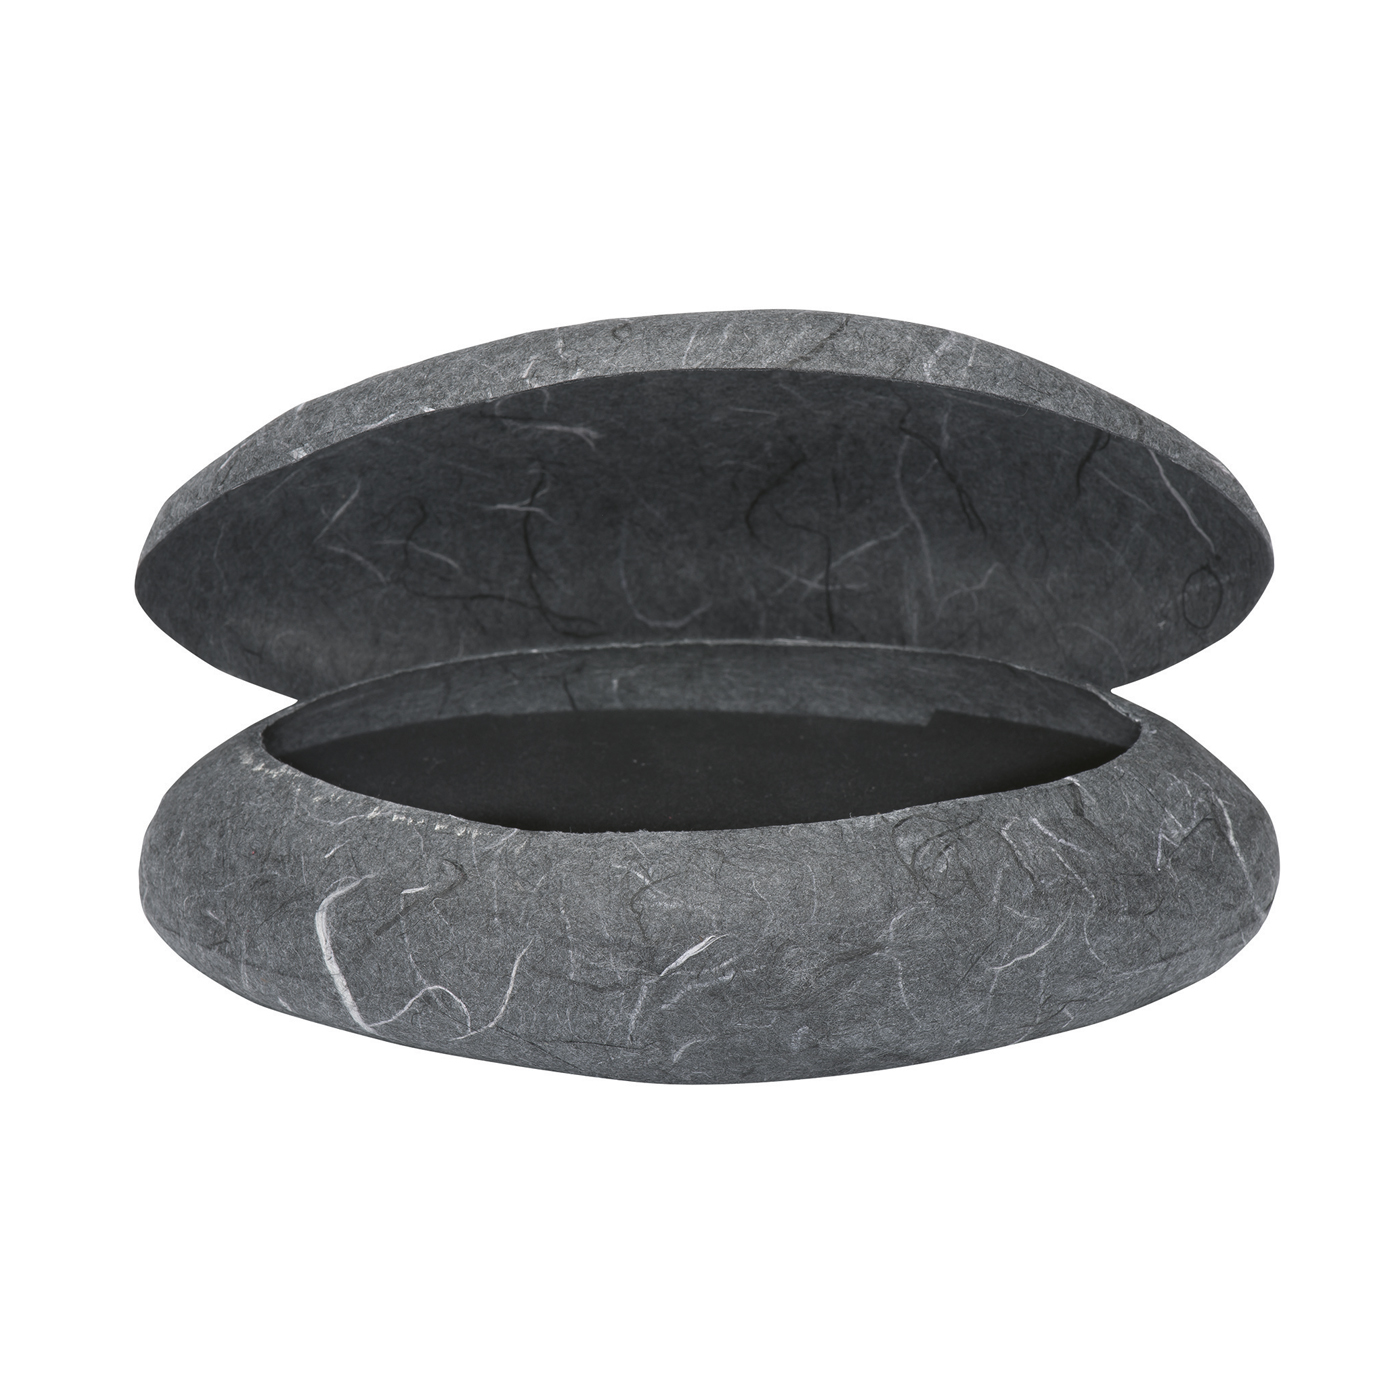 Jewellery Packaging "Stone", Anthracite Mottled,150x100x45mm - 1 piece